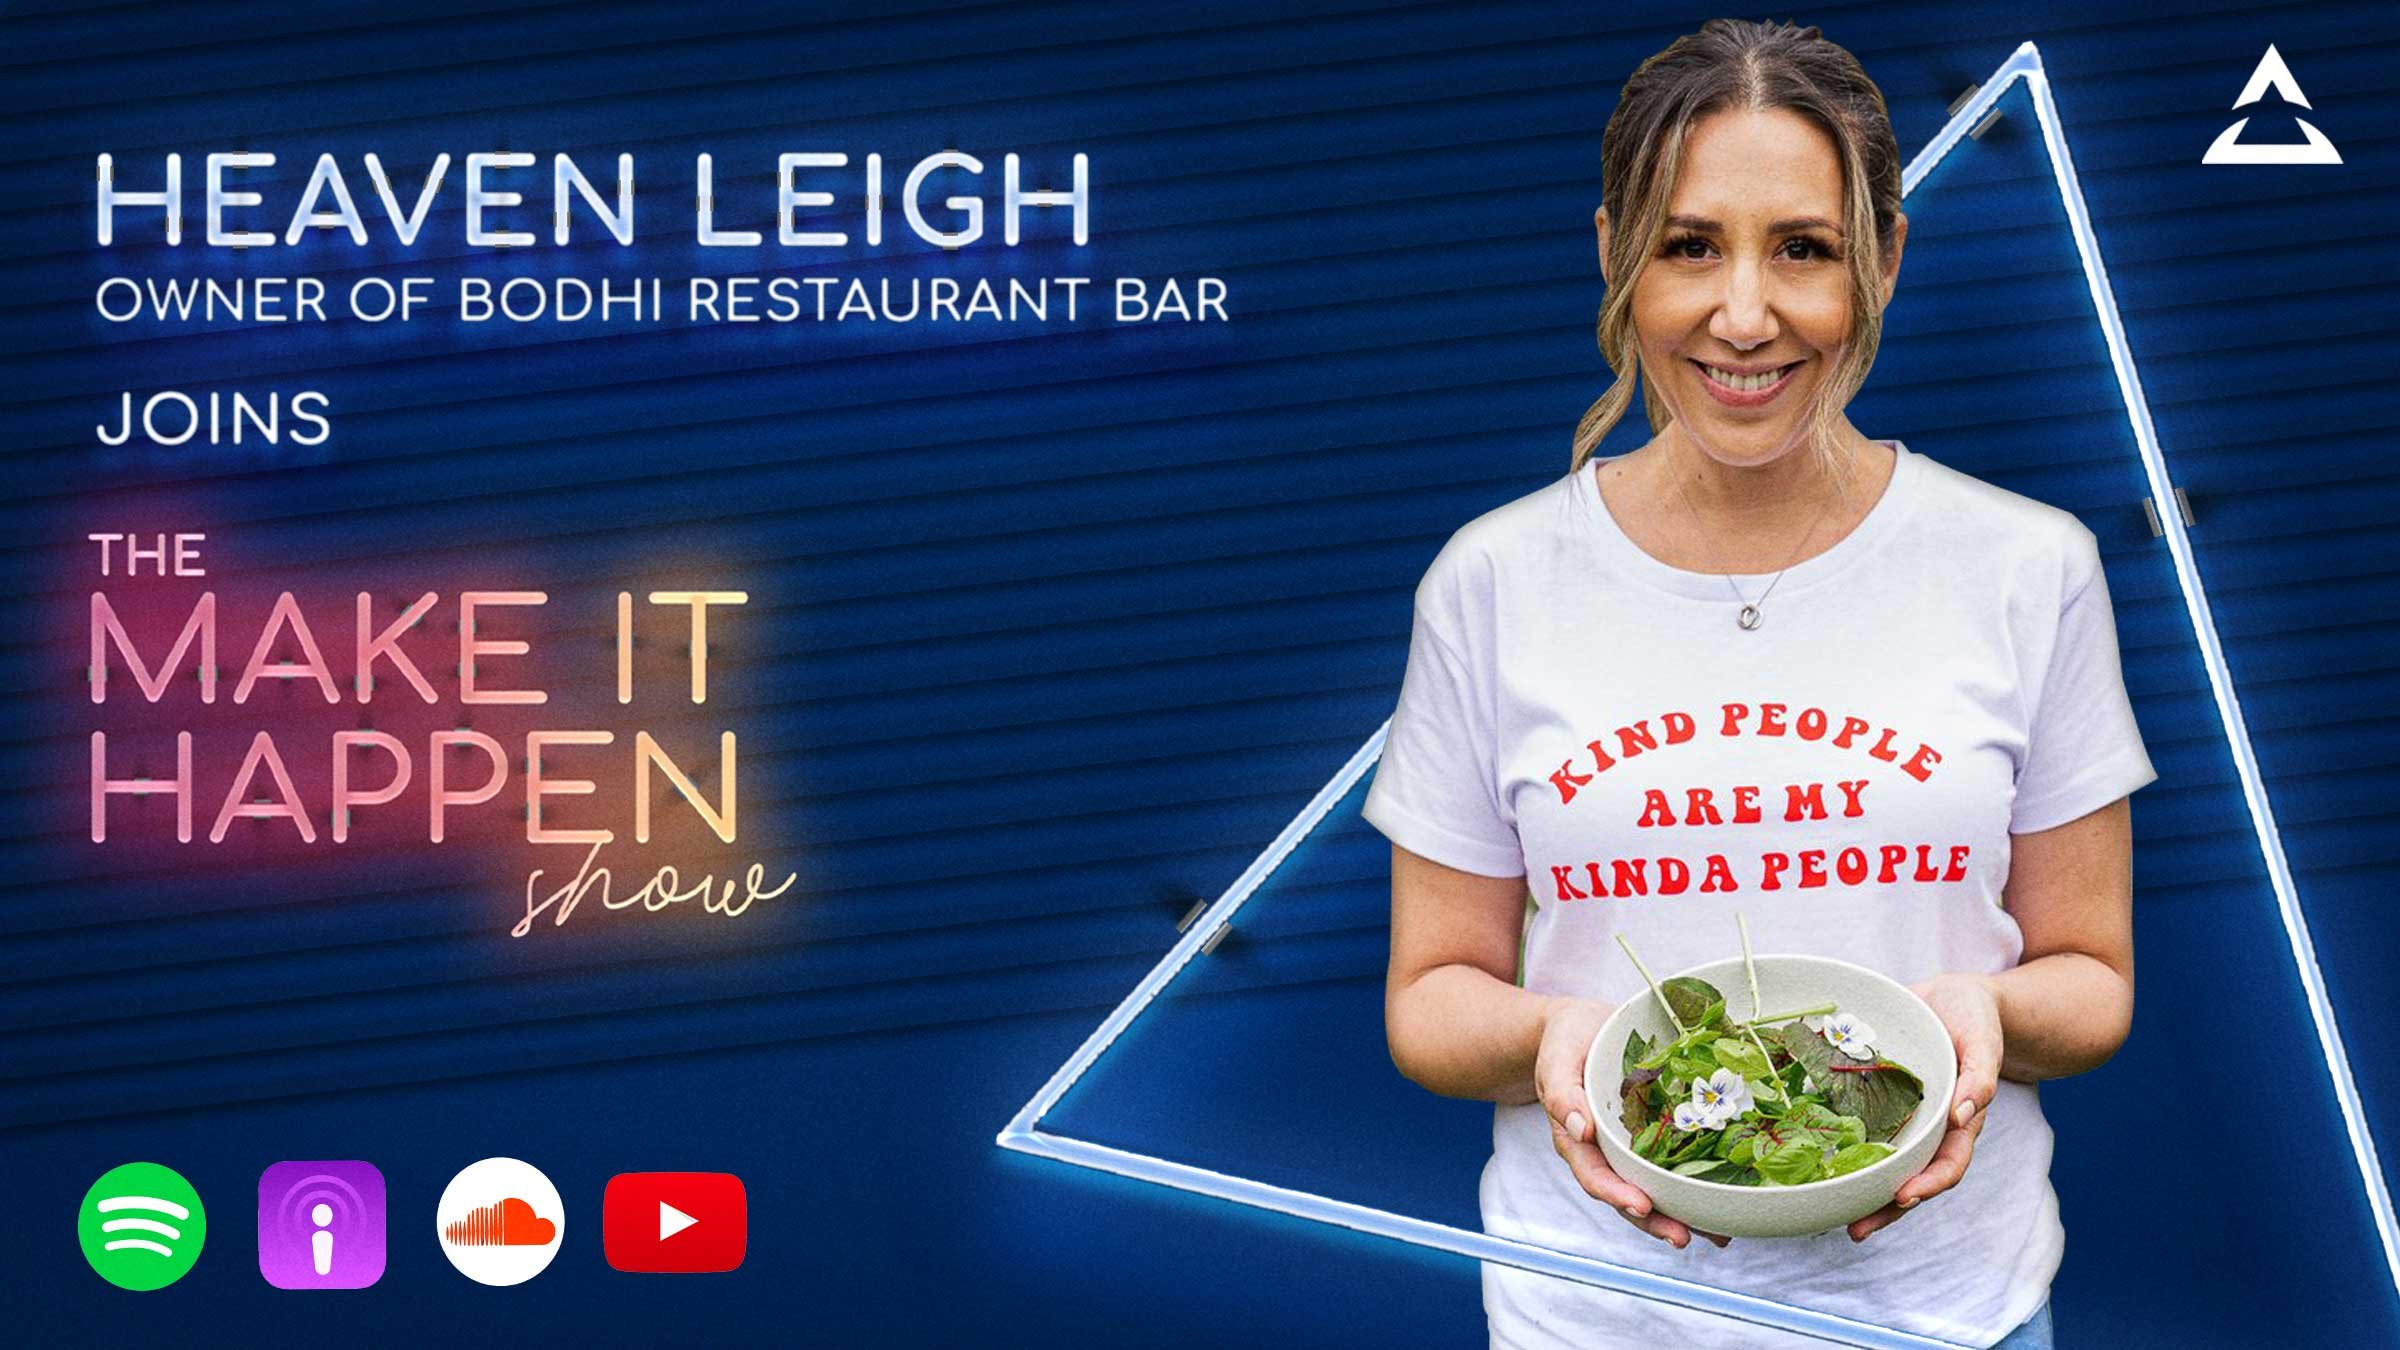 Heaven Leigh, Owner of Bodhi Restaurant Bar joins to The Make It Happen Show